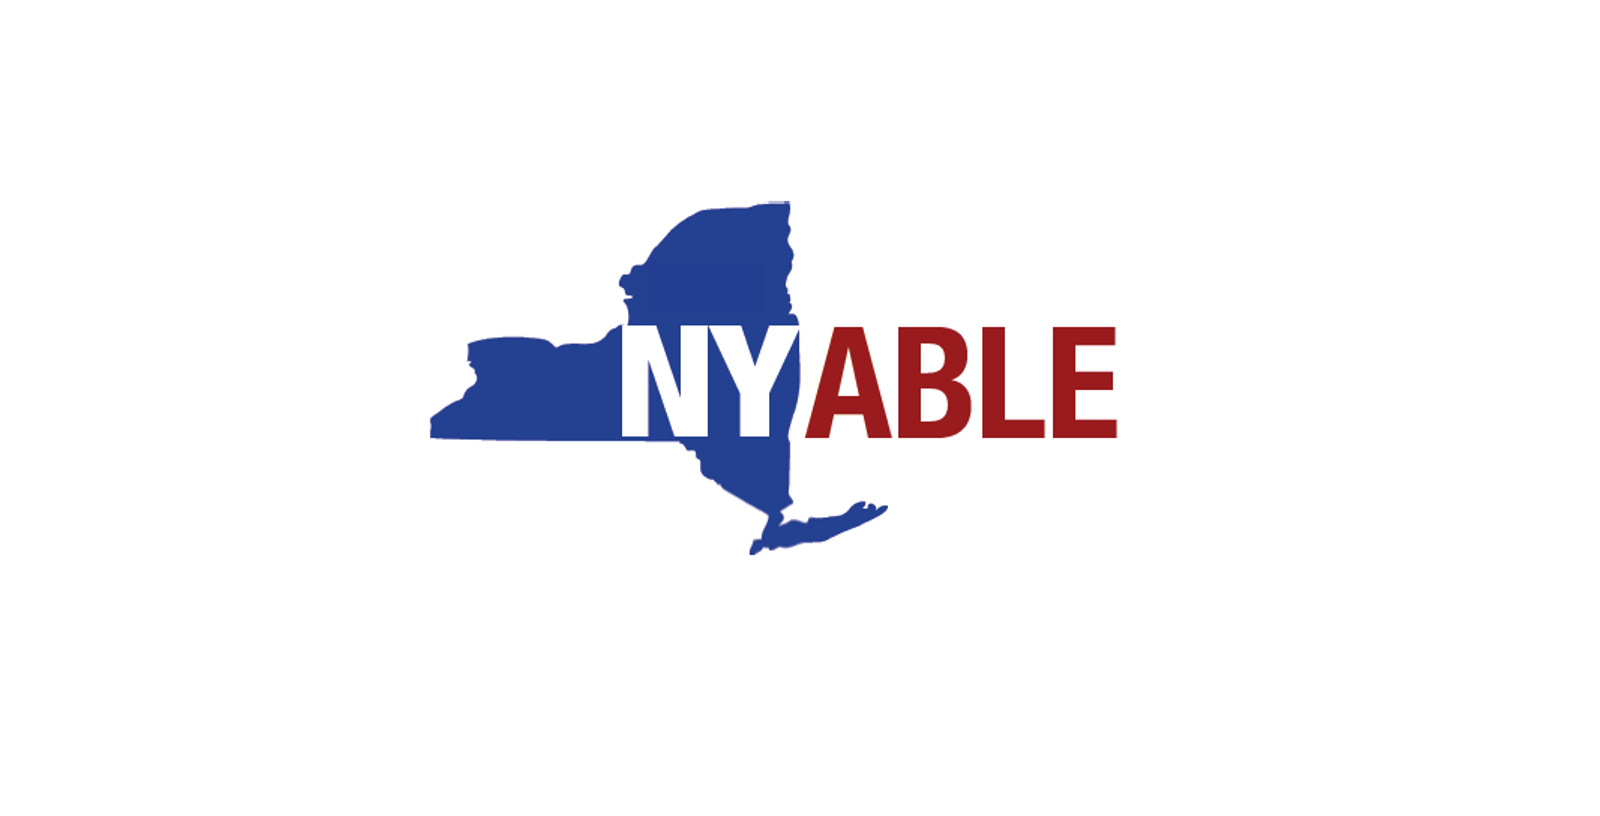 Blue colored shape of NY State on a white background overwritten by the words "NY ABLE"